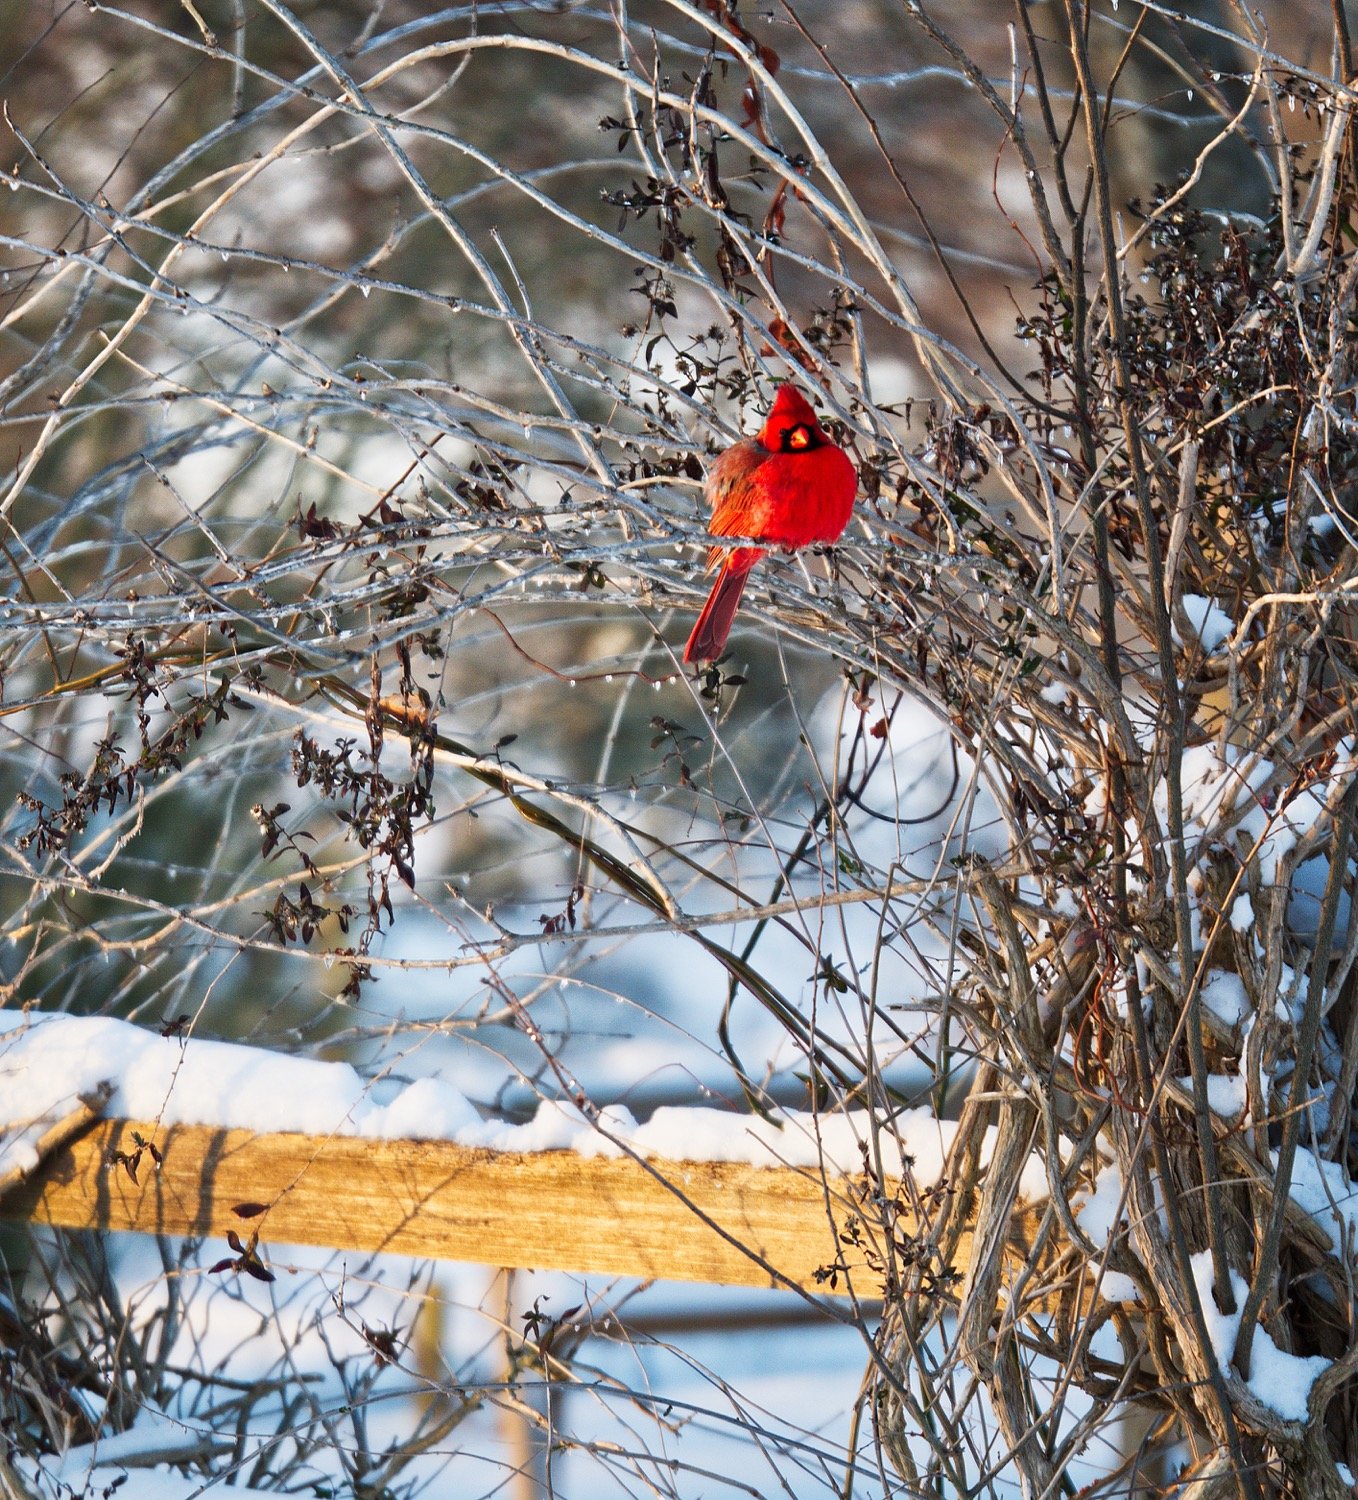 A cardinal at the Mineola Nature Preserve could find only icy branches and snowy railings on Monday evening. [see more cool photos]